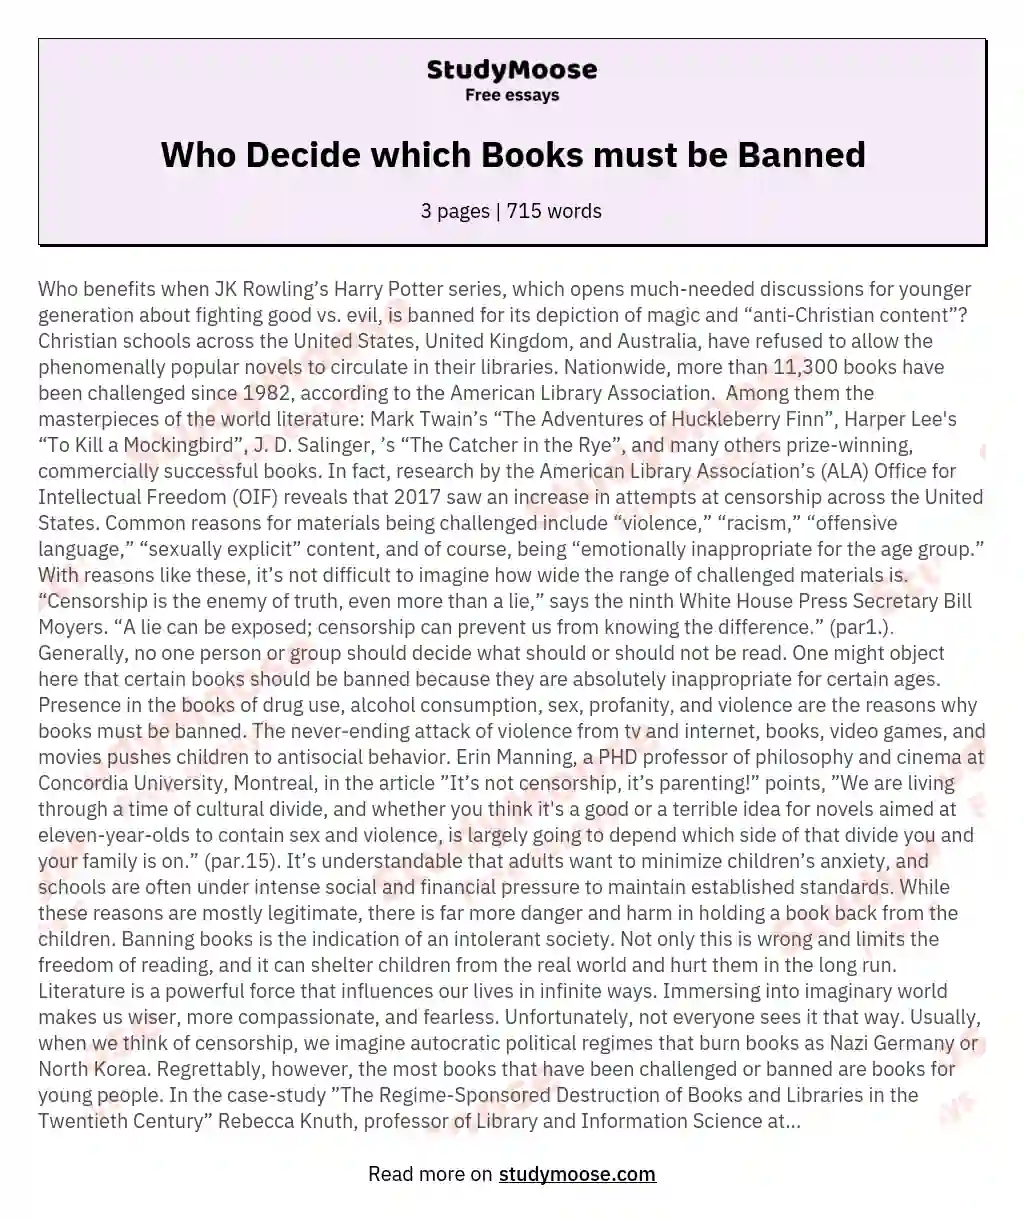 Who Decide which Books must be Banned essay